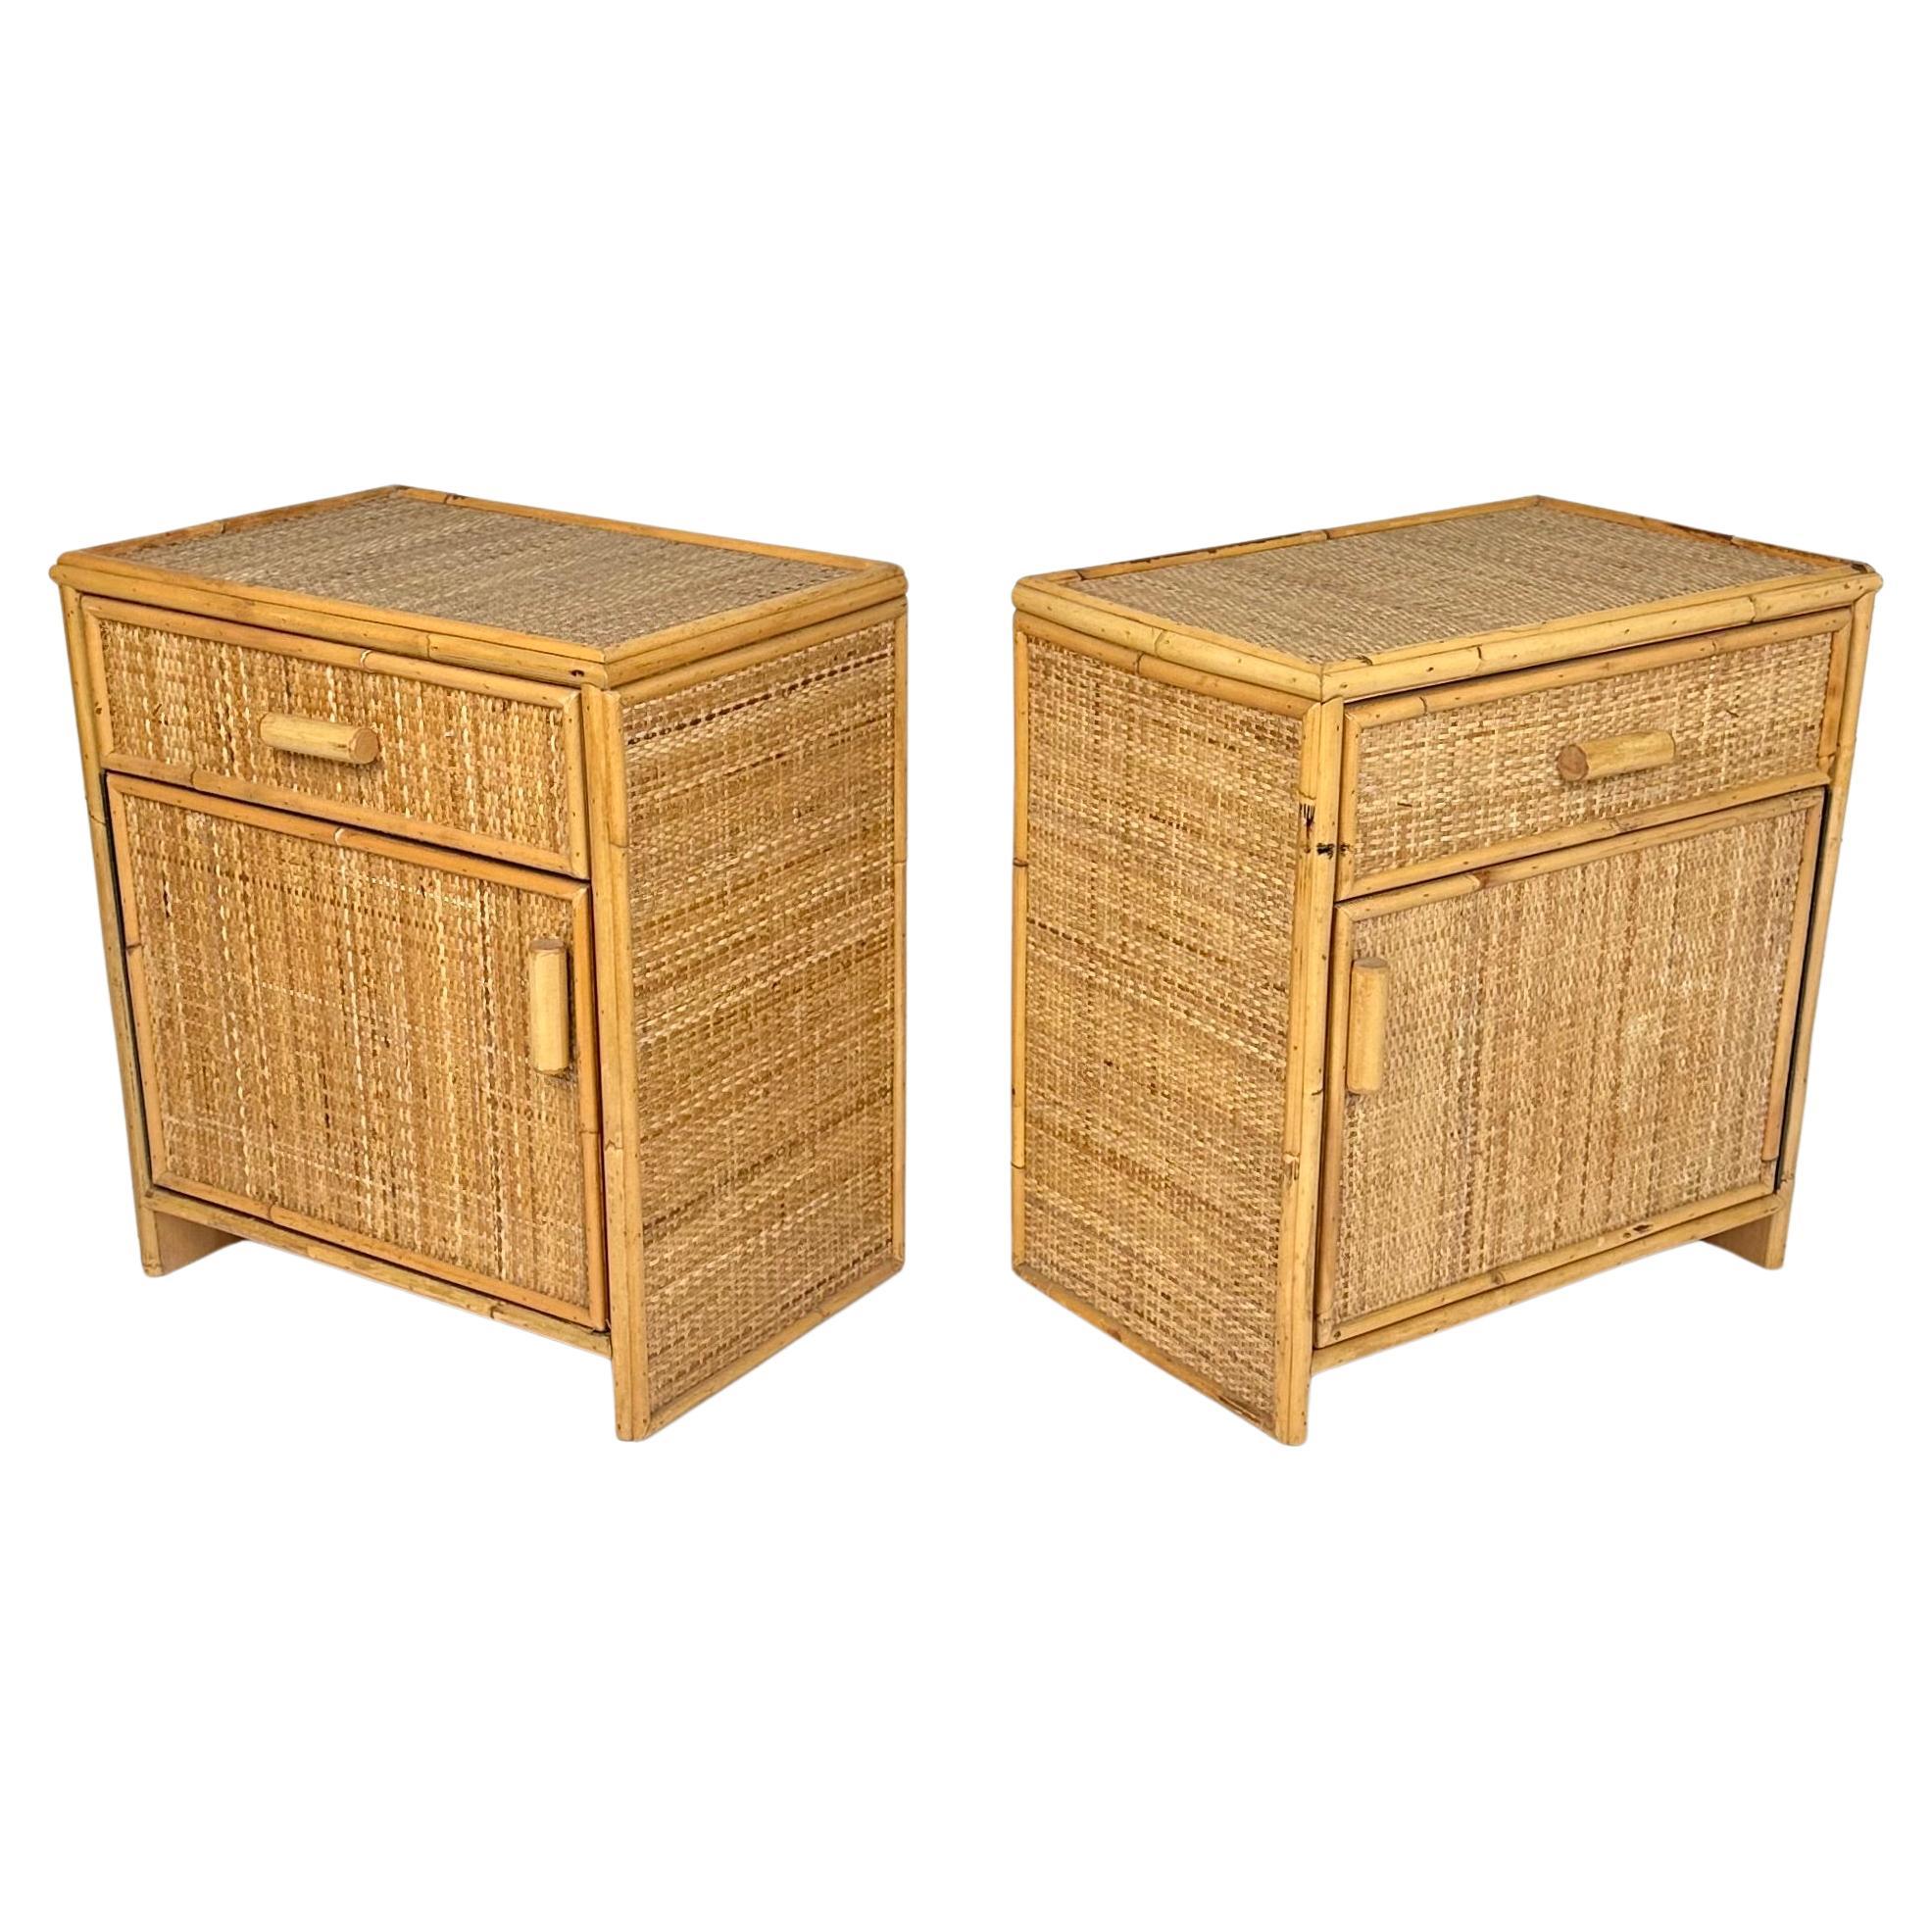 Mid-Century Modern Midcentury Pair of Bedside Tables Nightstands in Bamboo & Rattan, Italy 1970s For Sale